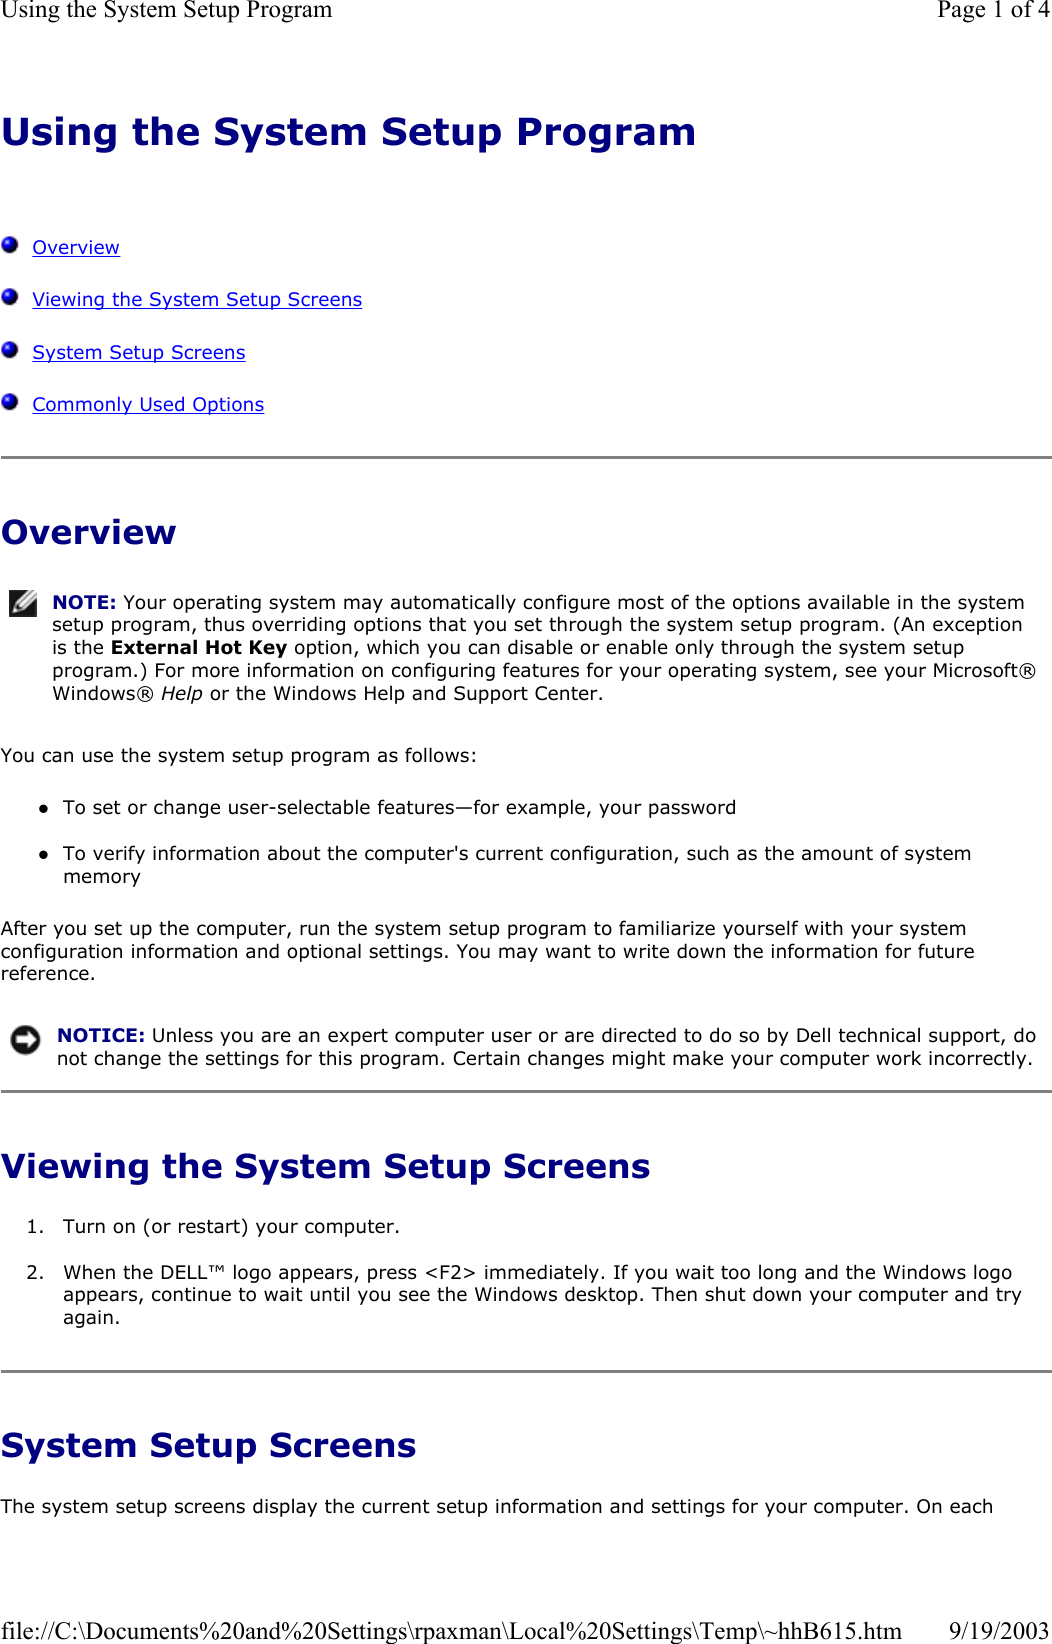 Using the System Setup Program      Overview   Viewing the System Setup Screens   System Setup Screens   Commonly Used Options Overview You can use the system setup program as follows: zTo set or change user-selectable features—for example, your password  zTo verify information about the computer&apos;s current configuration, such as the amount of system memory  After you set up the computer, run the system setup program to familiarize yourself with your system configuration information and optional settings. You may want to write down the information for future reference. Viewing the System Setup Screens 1. Turn on (or restart) your computer.  2. When the DELL™ logo appears, press &lt;F2&gt; immediately. If you wait too long and the Windows logo appears, continue to wait until you see the Windows desktop. Then shut down your computer and try again.  System Setup Screens The system setup screens display the current setup information and settings for your computer. On each NOTE: Your operating system may automatically configure most of the options available in the system setup program, thus overriding options that you set through the system setup program. (An exception is the External Hot Key option, which you can disable or enable only through the system setup program.) For more information on configuring features for your operating system, see your Microsoft® Windows® Help or the Windows Help and Support Center.NOTICE: Unless you are an expert computer user or are directed to do so by Dell technical support, do not change the settings for this program. Certain changes might make your computer work incorrectly. Page 1 of 4Using the System Setup Program9/19/2003file://C:\Documents%20and%20Settings\rpaxman\Local%20Settings\Temp\~hhB615.htm